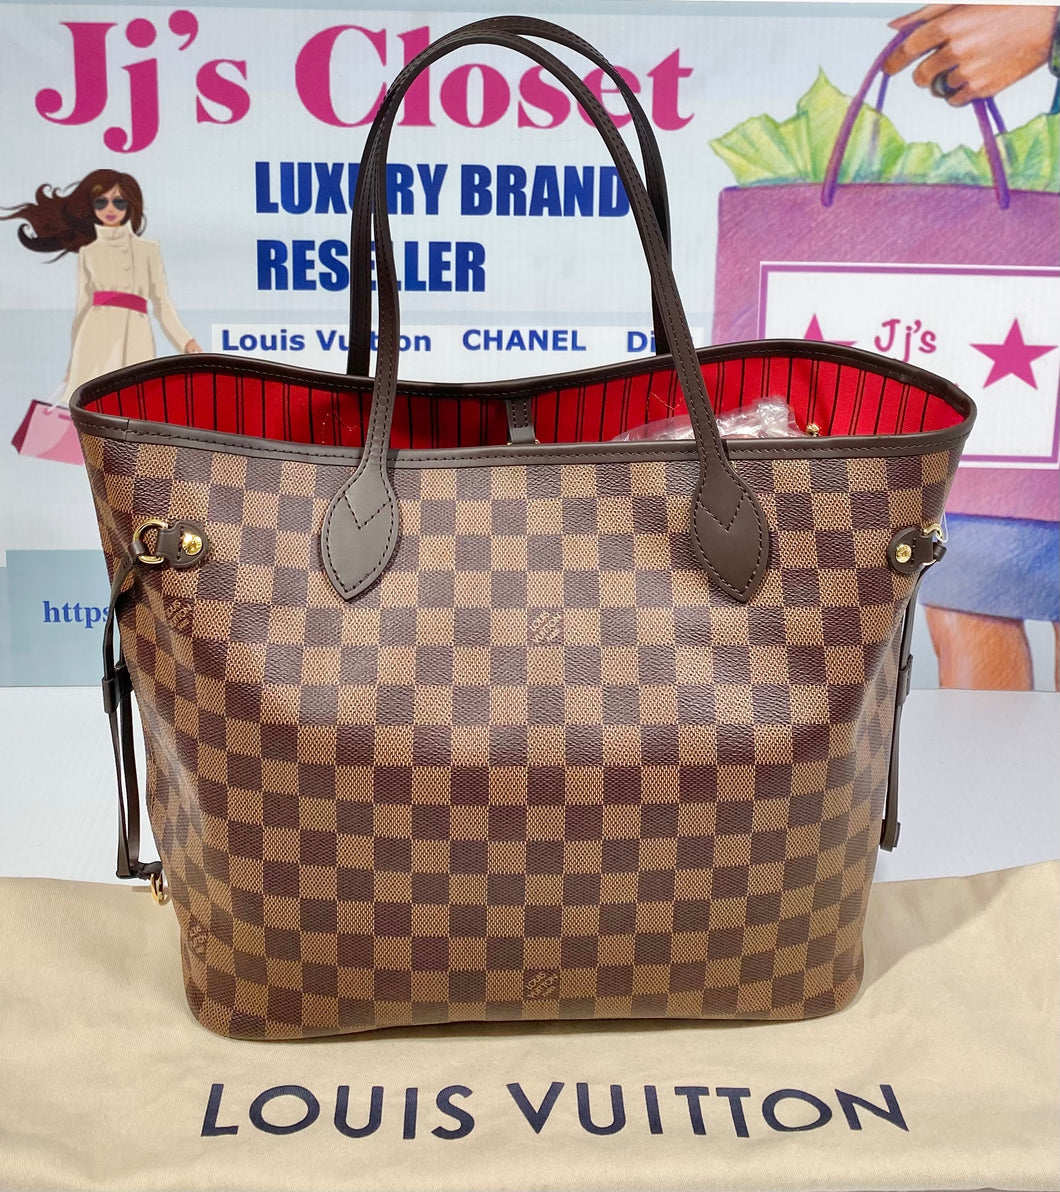 LOUIS VUITTON Pre Owned Tote Bag Damier Ebene Neverfull GM